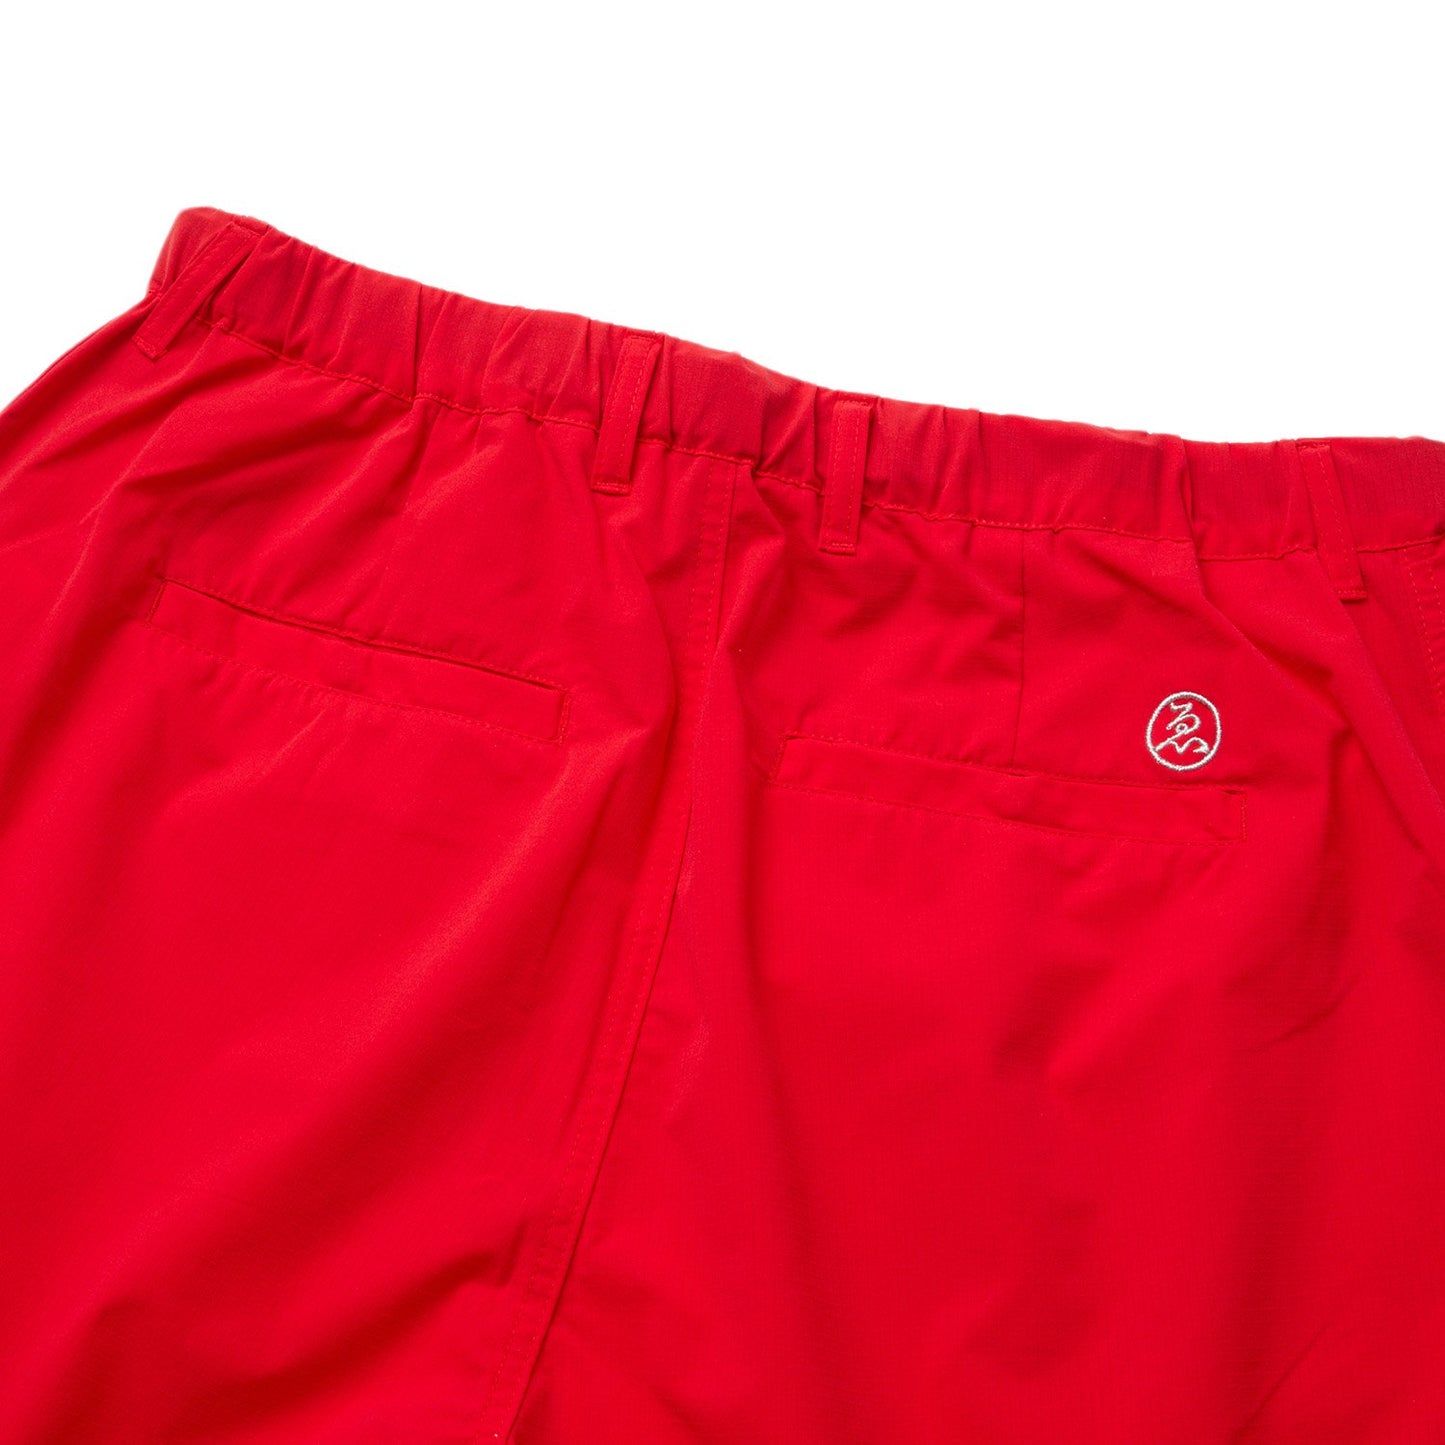 RIVER JUMP PAINTER SHORTS - RED